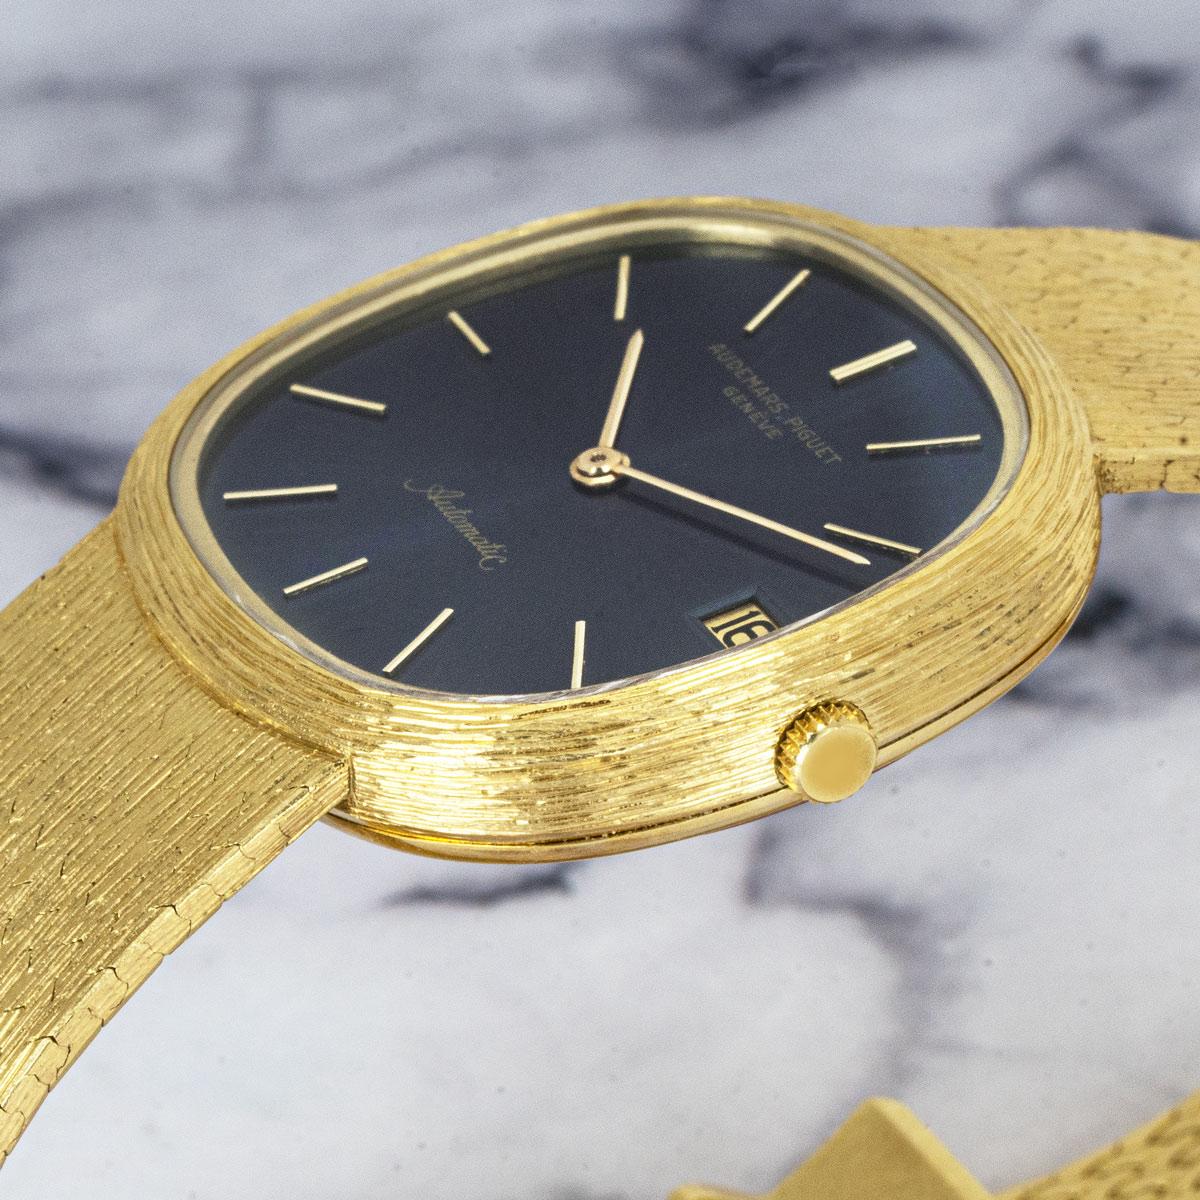 A yellow gold 32mm Dress Watch by Audemars Piguet. Featuring a blue dial with applied hour markers and a textured yellow gold bezel.

Fitted with a sapphire glass, a self-winding automatic movement and a yellow gold integrated bracelet equipped with